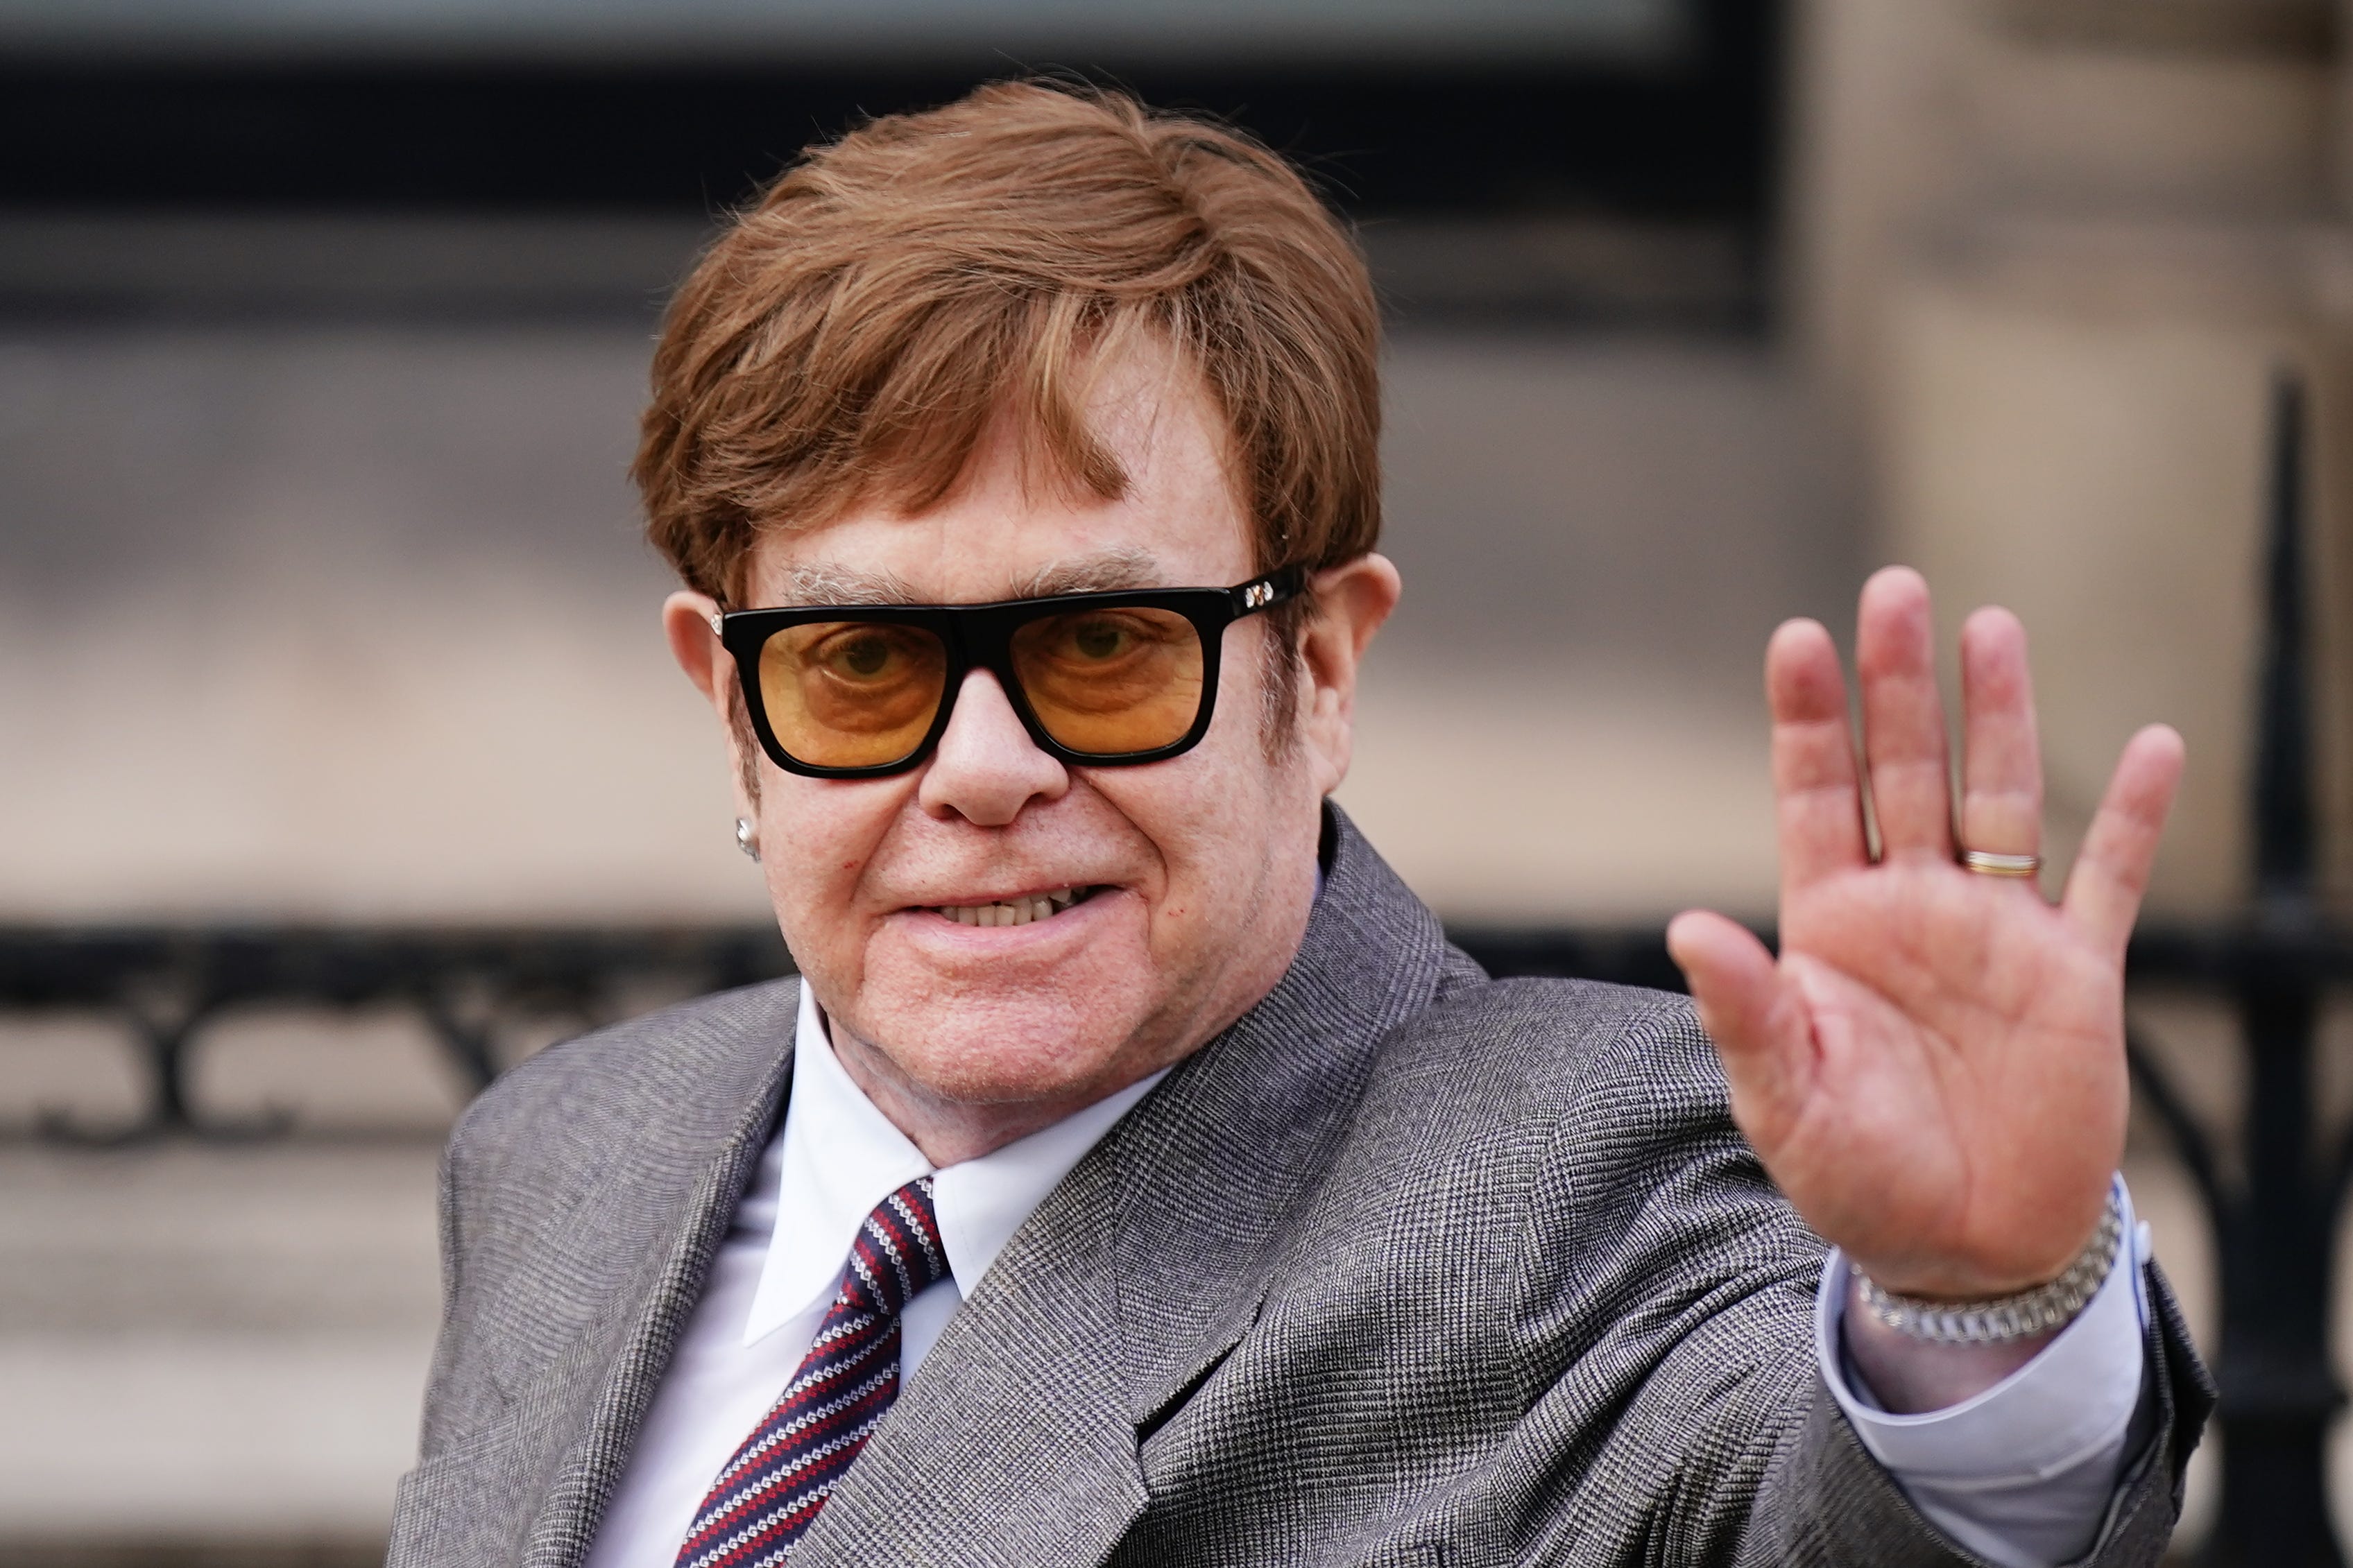 Sir Elton John has also brought a legal claim against the Daily Mail publisher